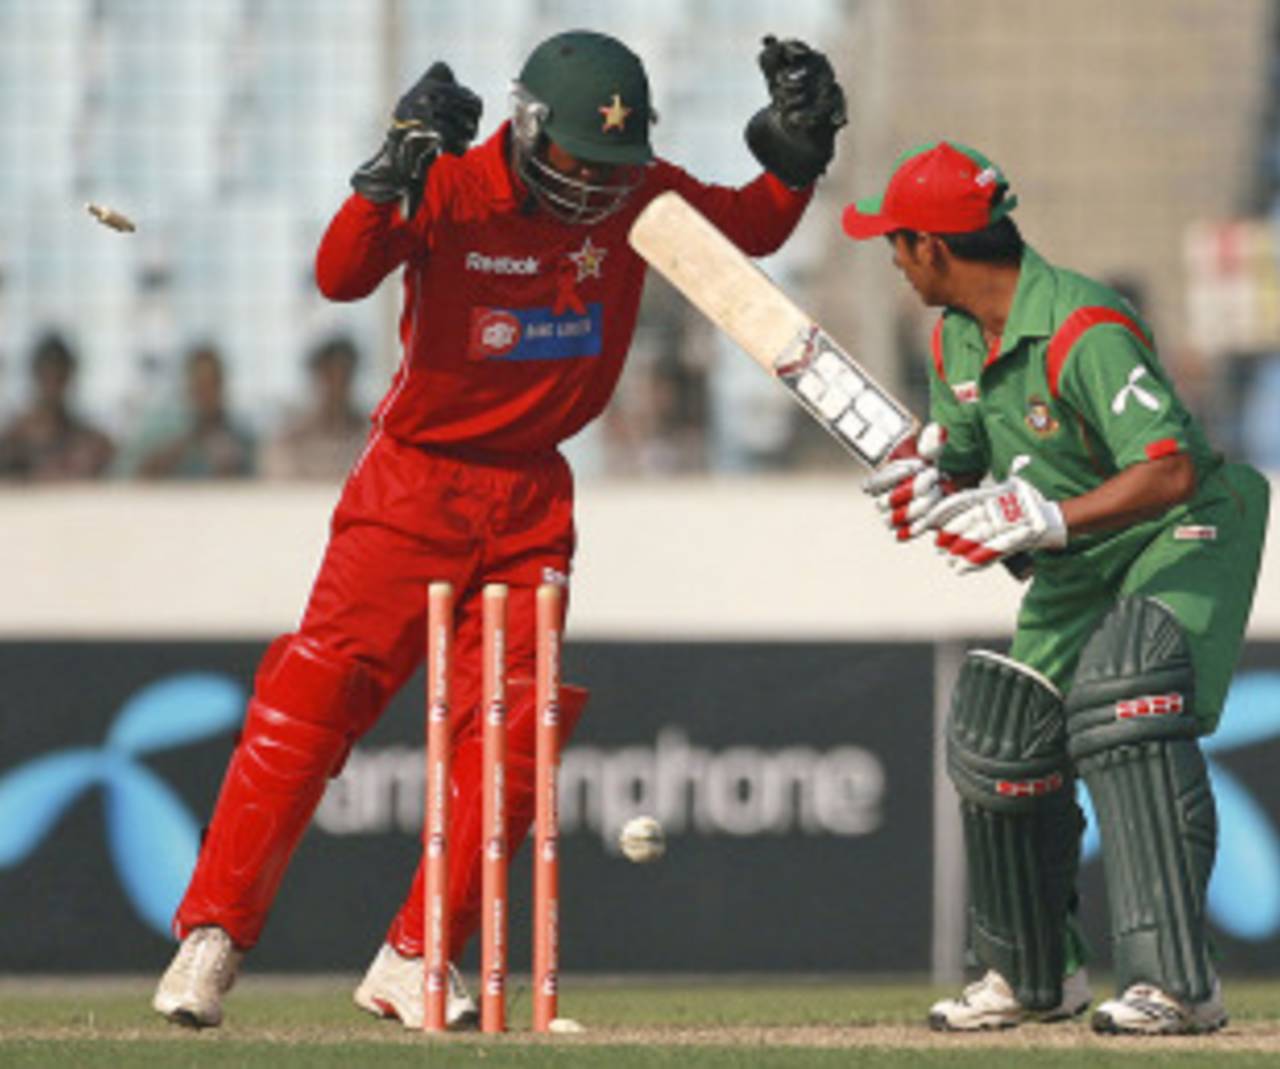 Tatenda Taibu and Mohammad Ashraful must surely have grown accustomed to each other's company on the field over the years&nbsp;&nbsp;&bull;&nbsp;&nbsp;Associated Press